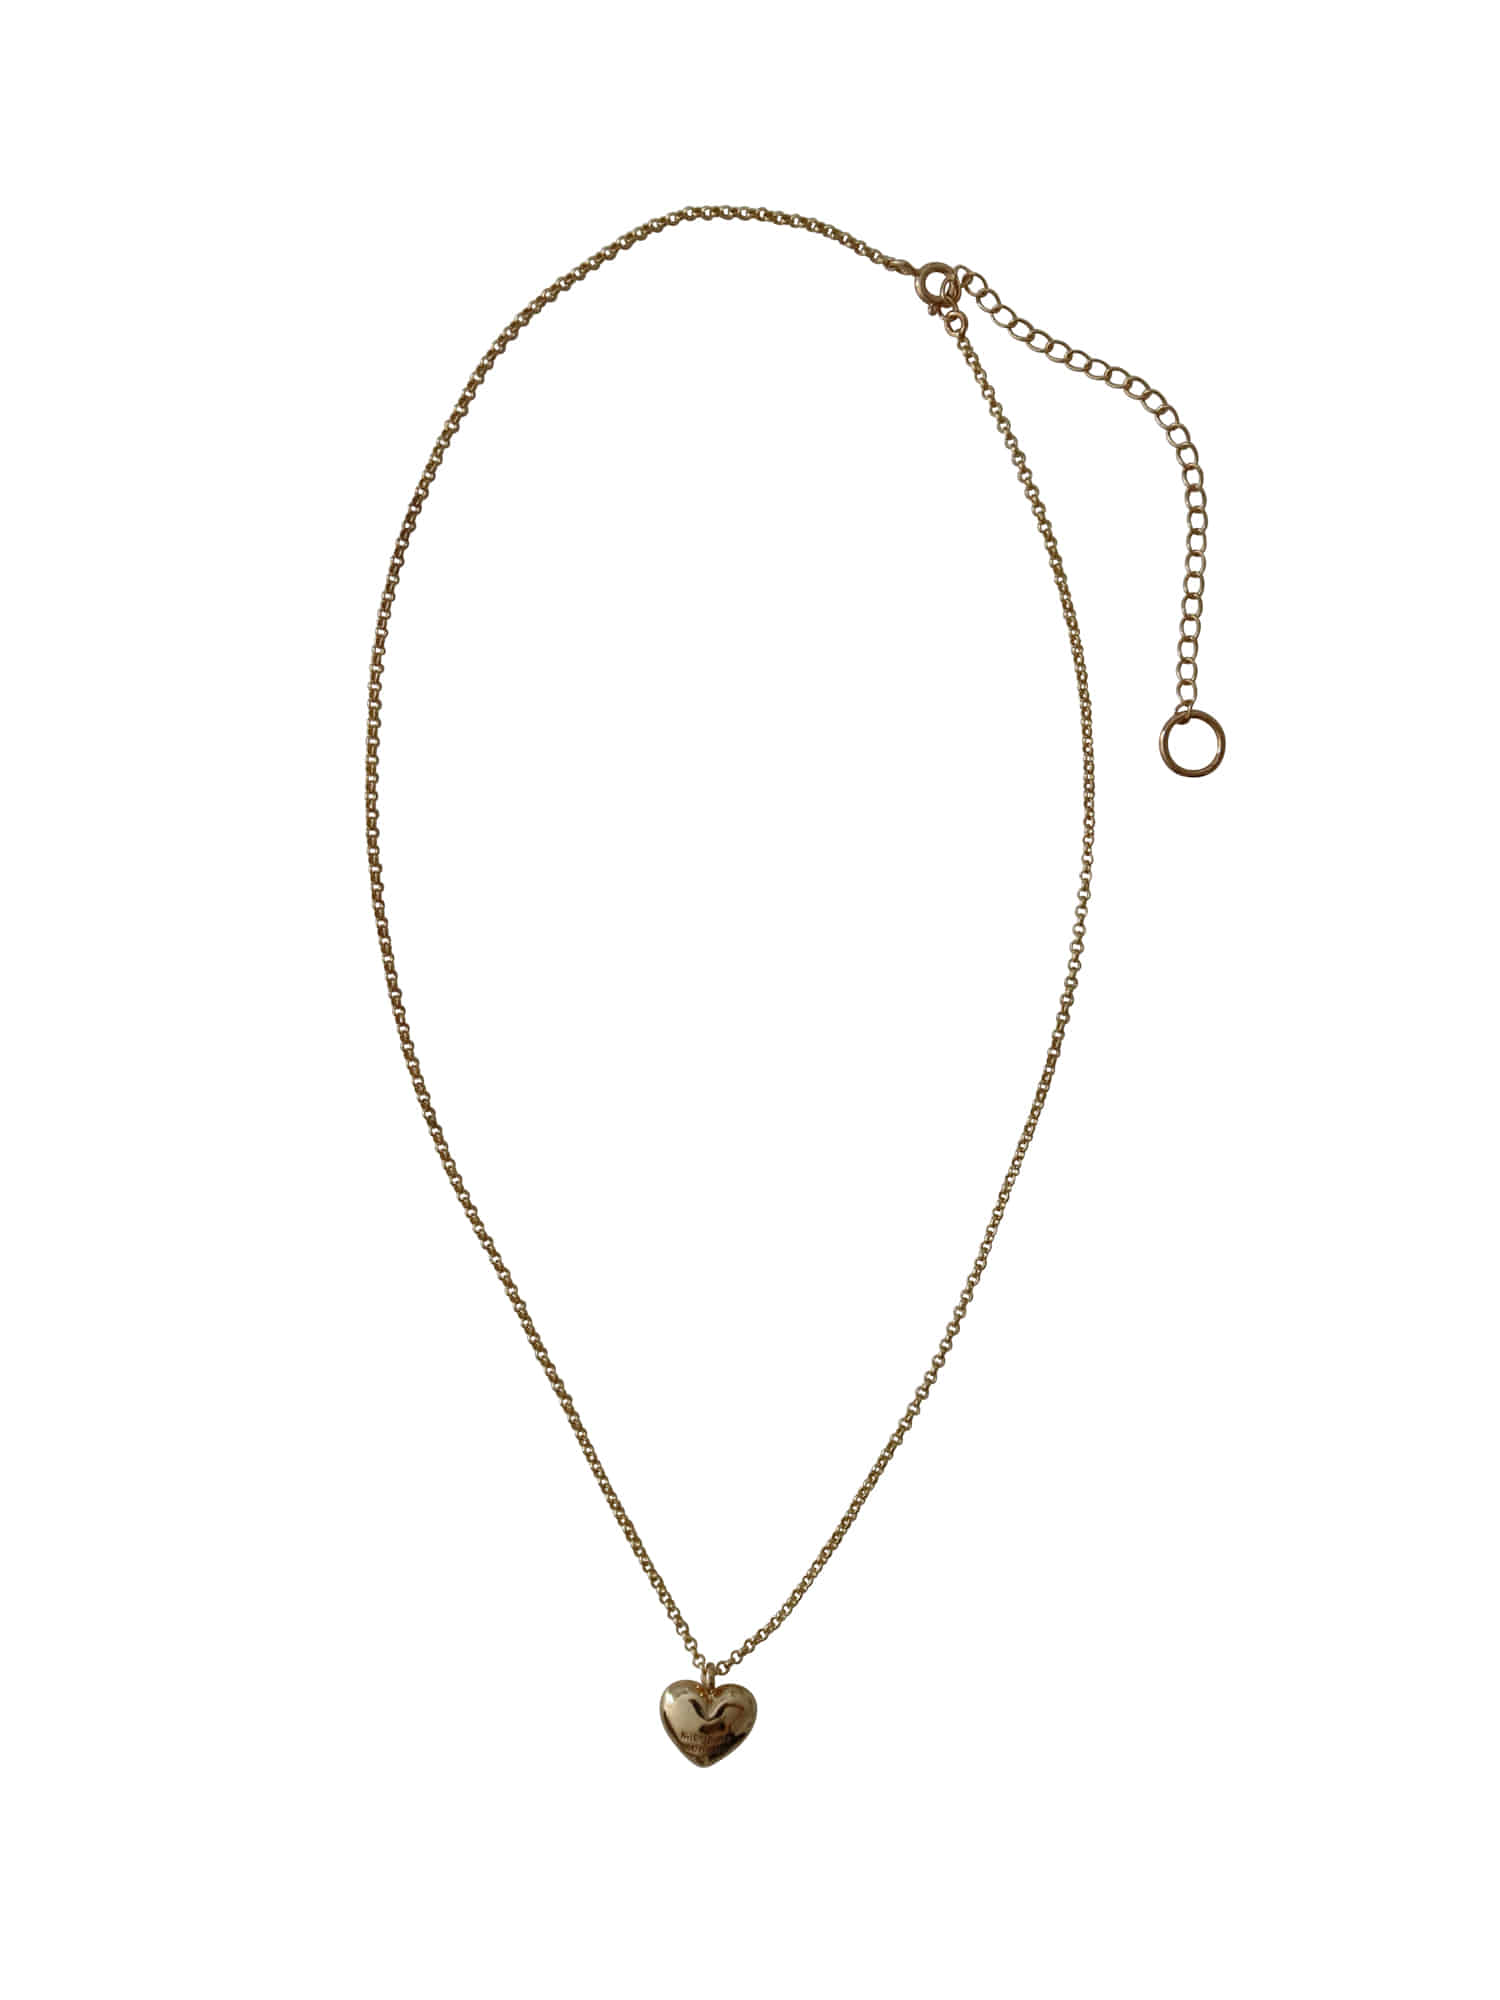 Lovable Necklace - Gold